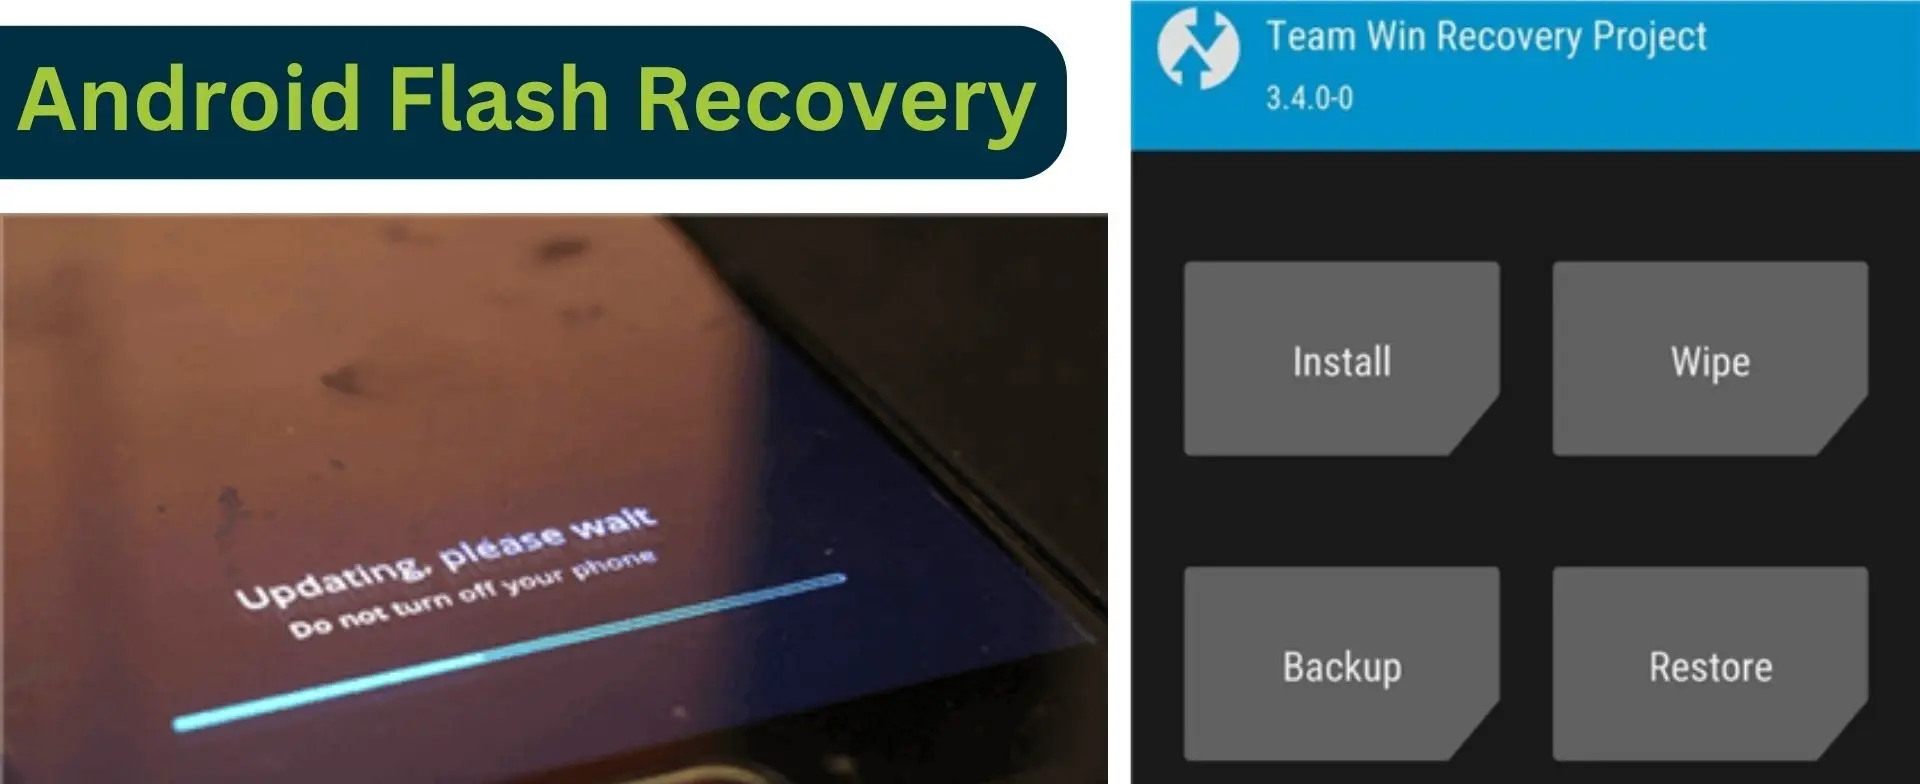 android flash recovary